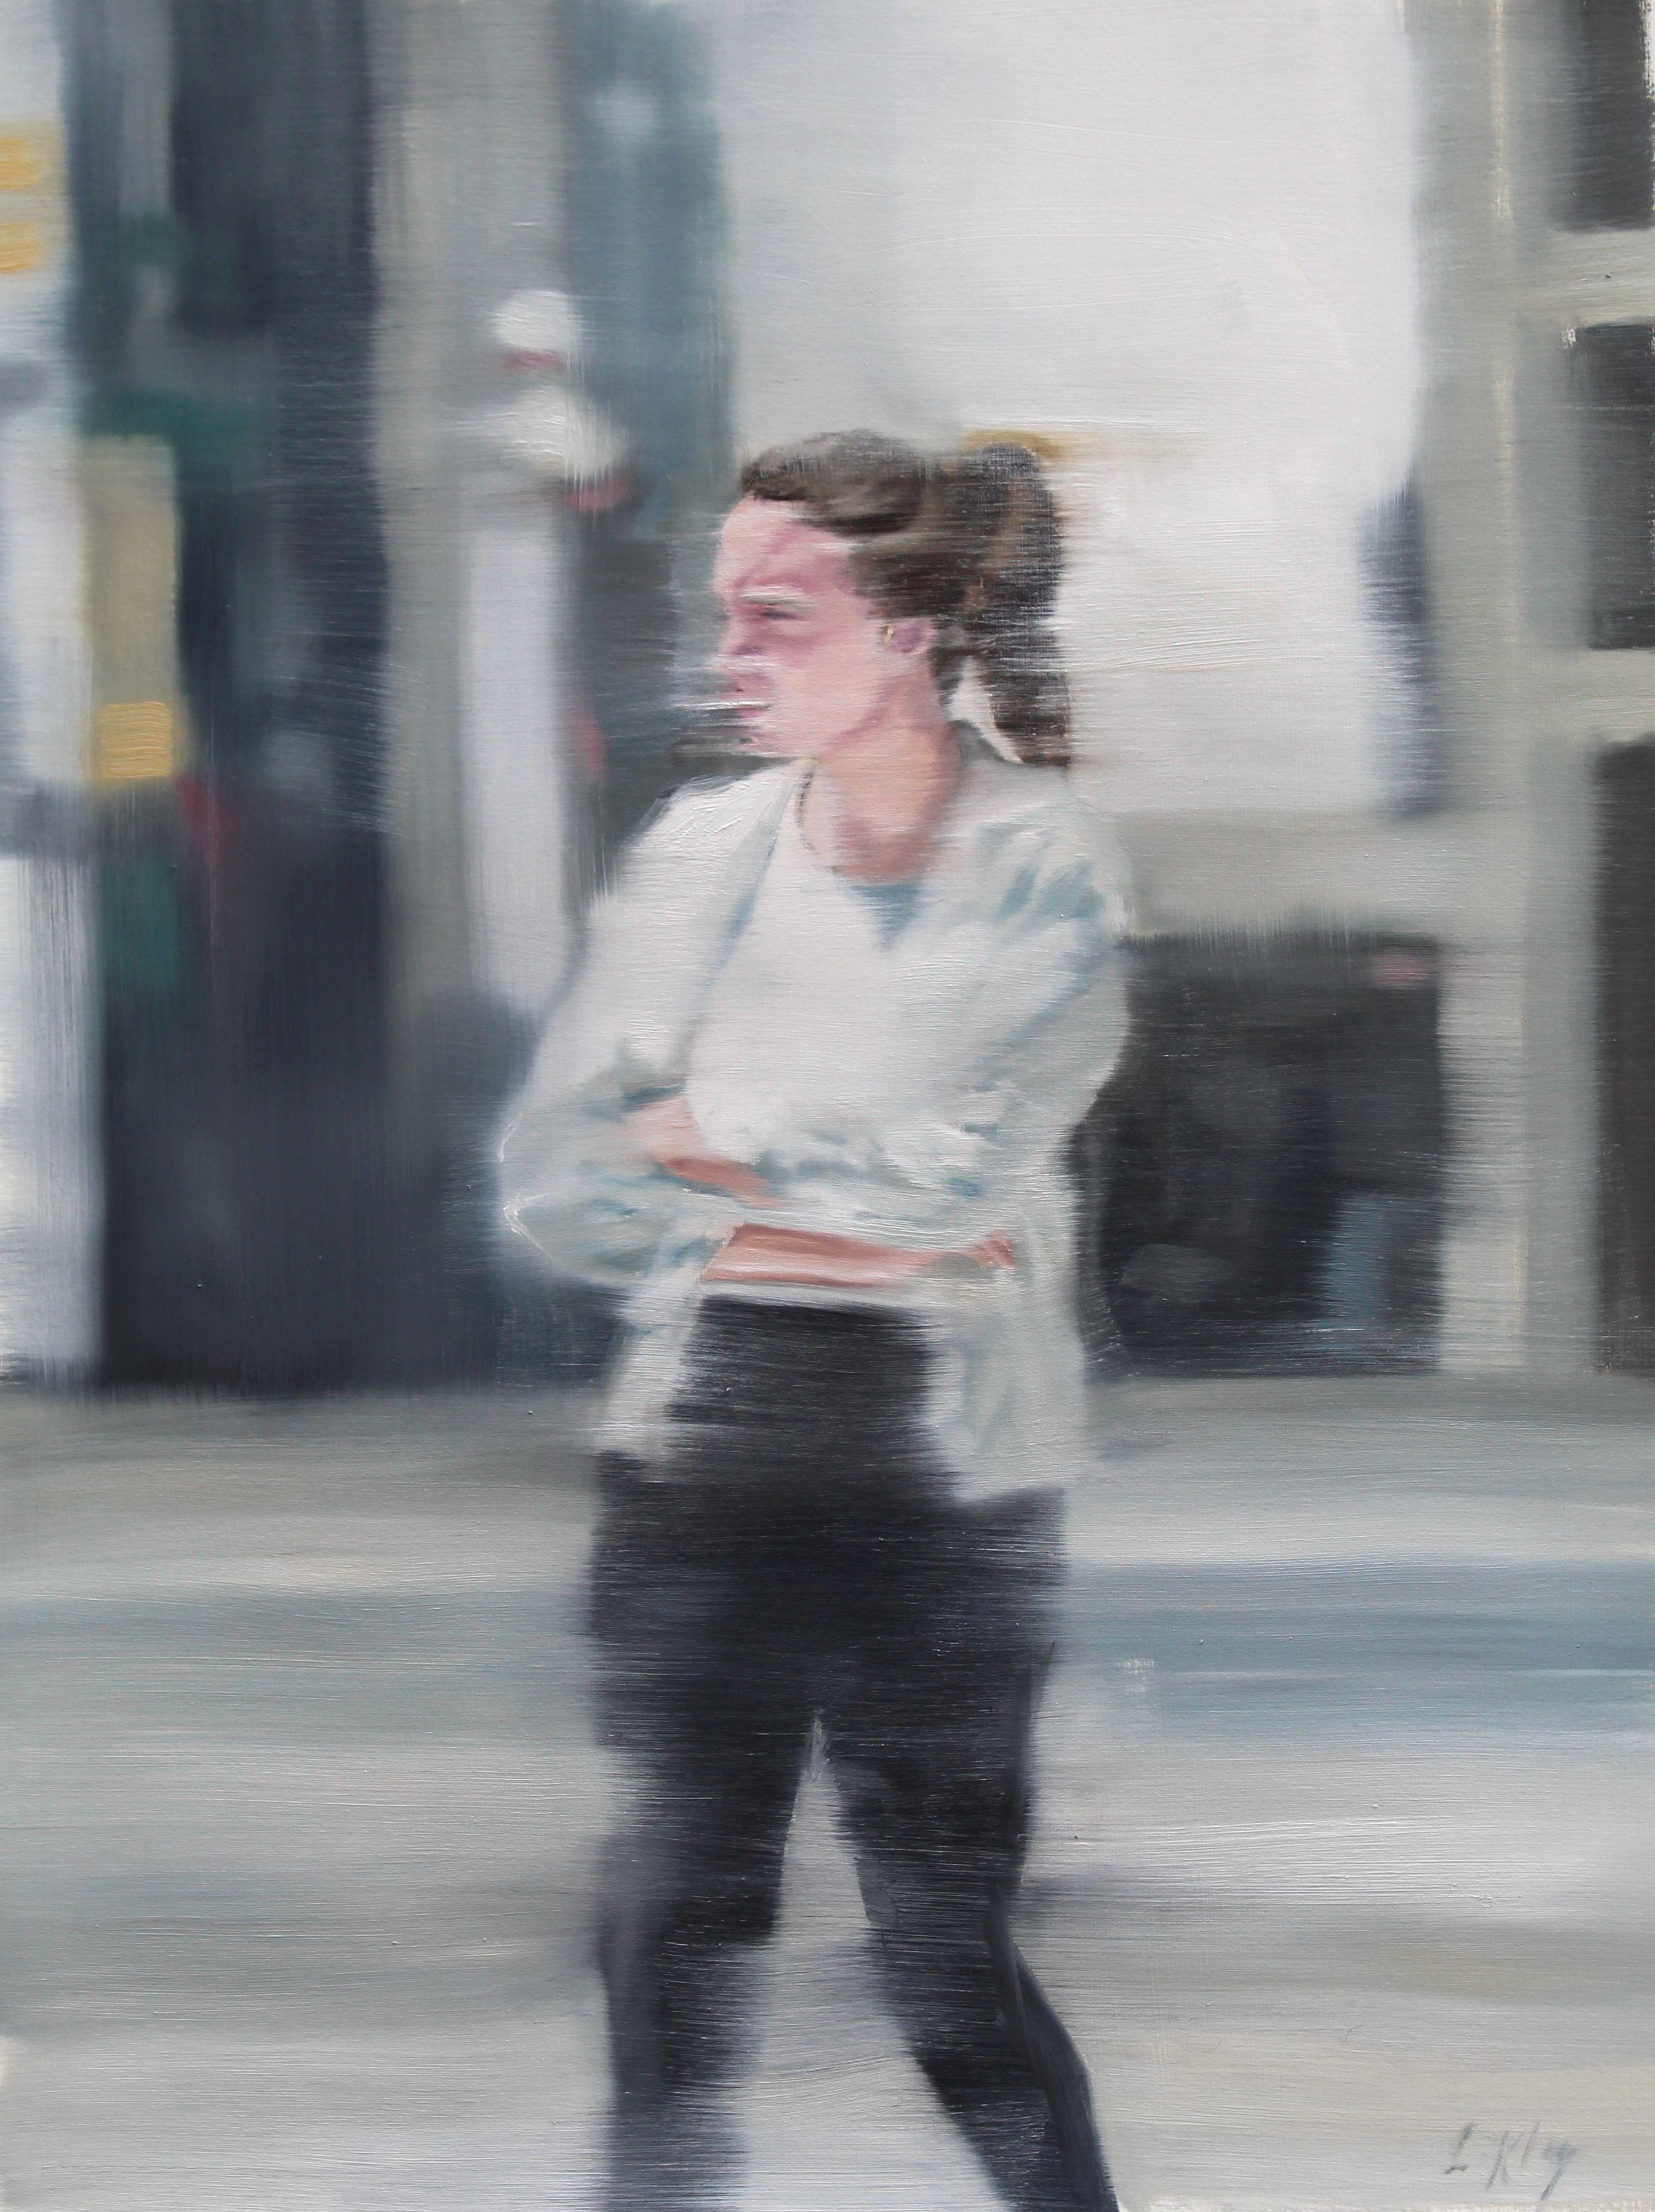 Walking in the city, she takes a moment. It was her moment to clear her head or make clear her direction. Although it was hers, the viewer can get a glance into this moment. The painting is on heavy, primed paper, painted with oils and blurred with